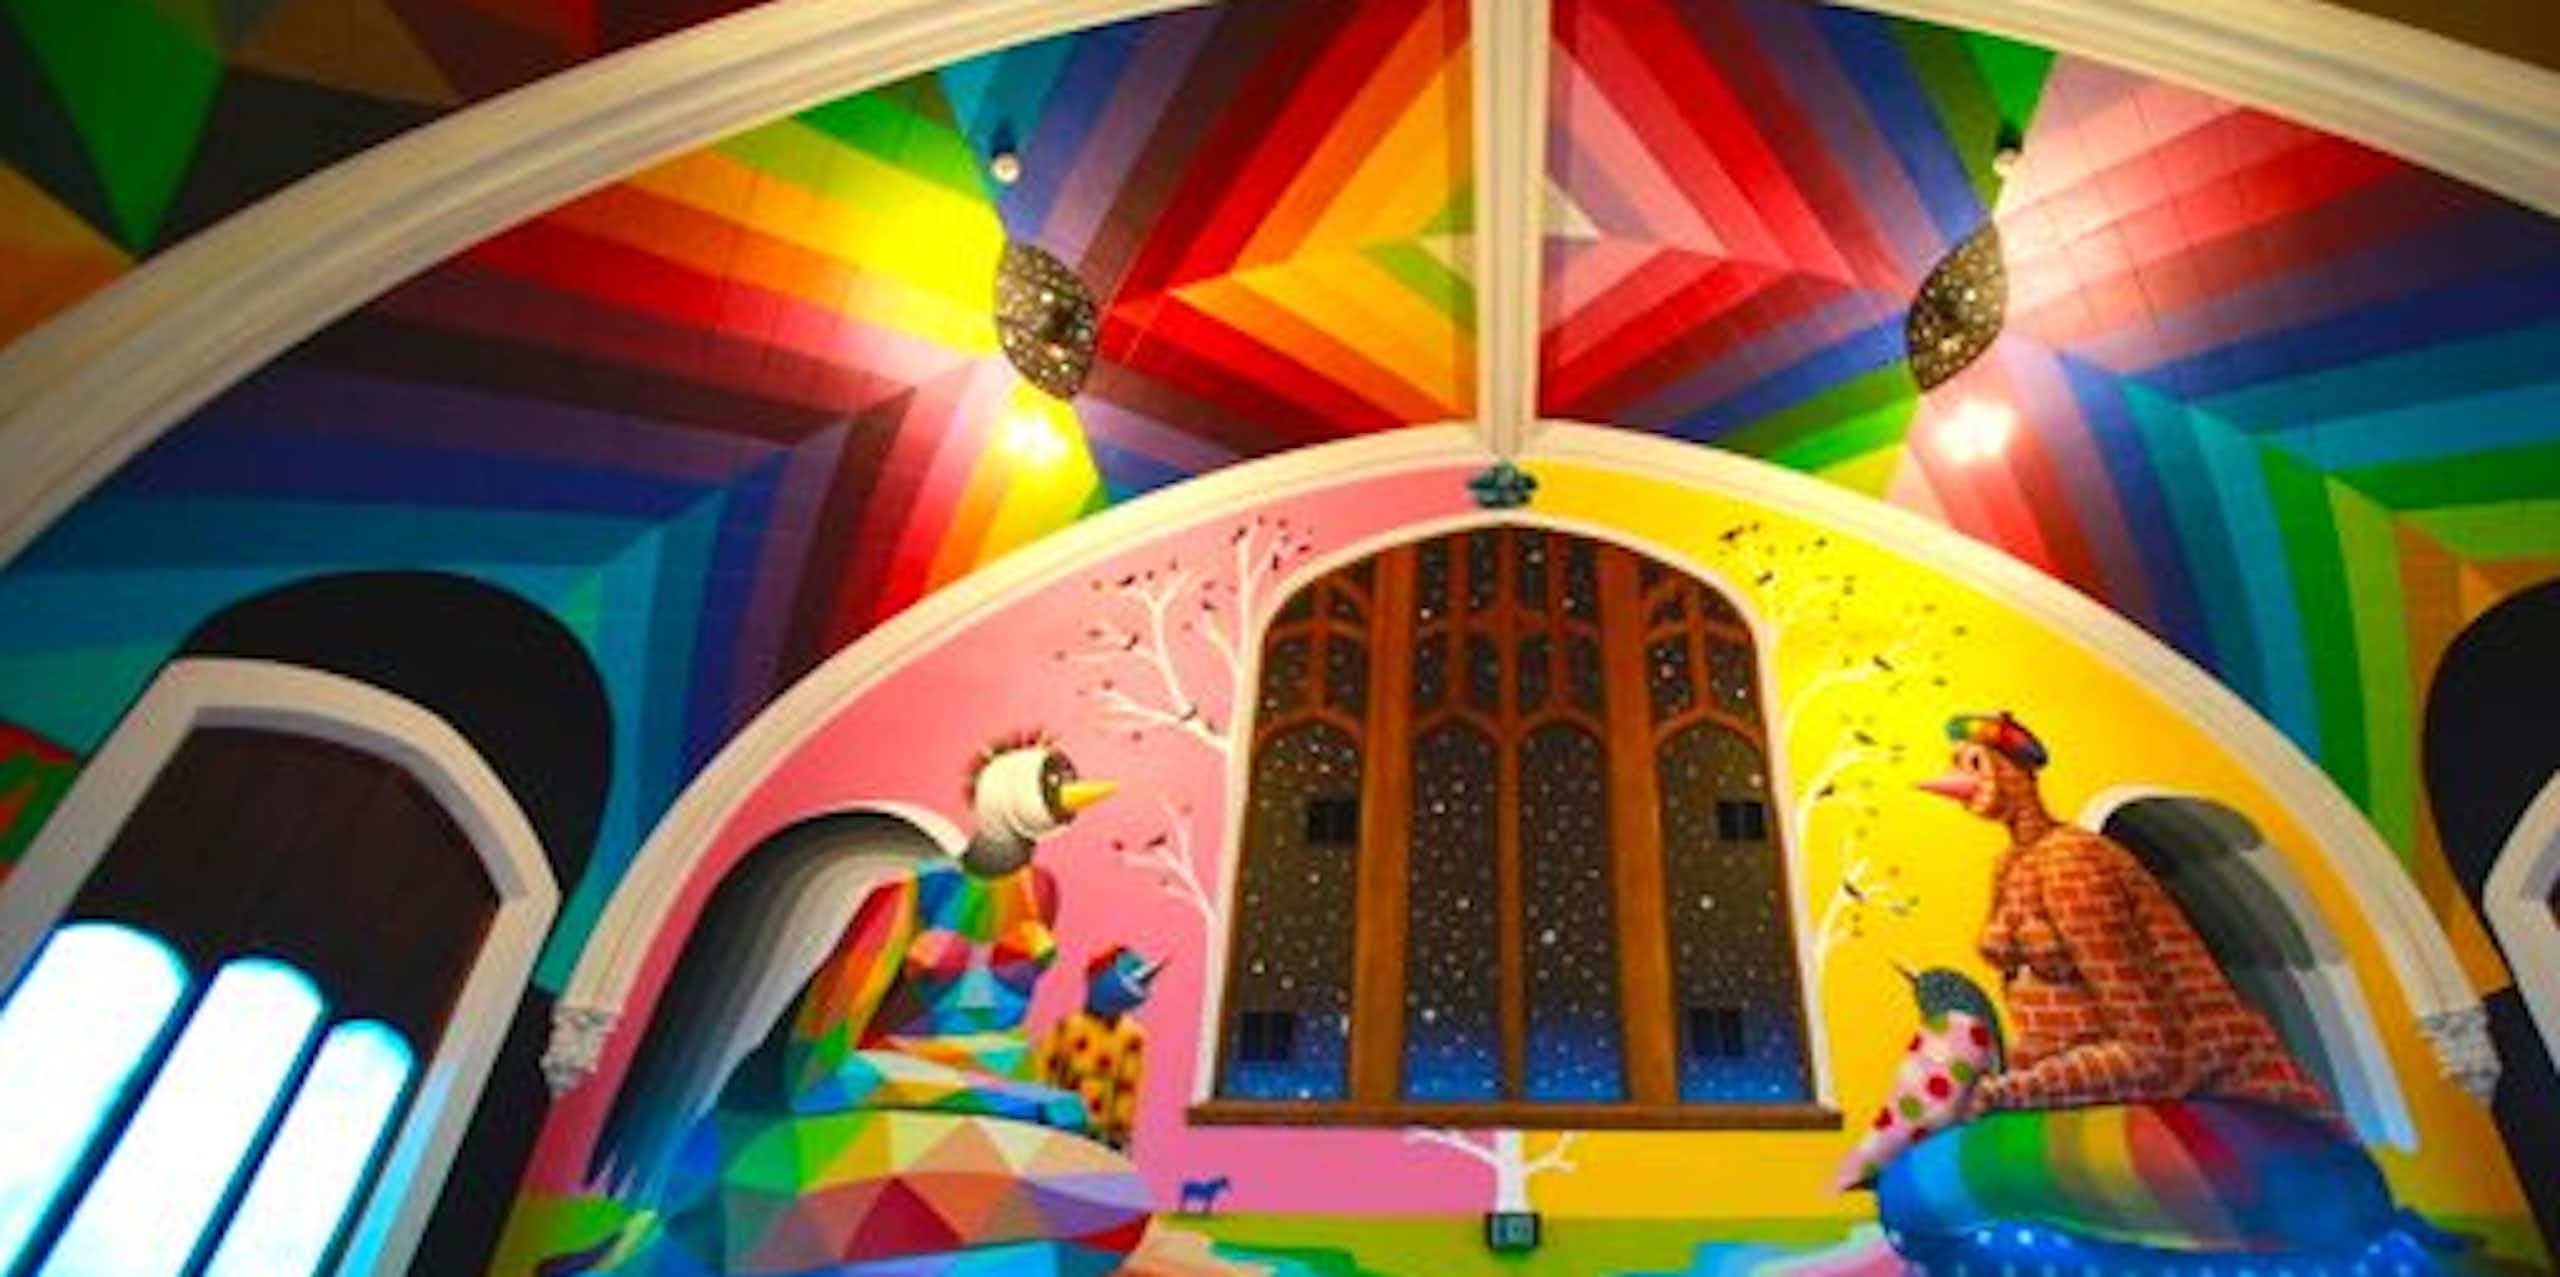 A church with a flamboyant technicolor interior, with a mural on the  wall showing two figures smoking weed.